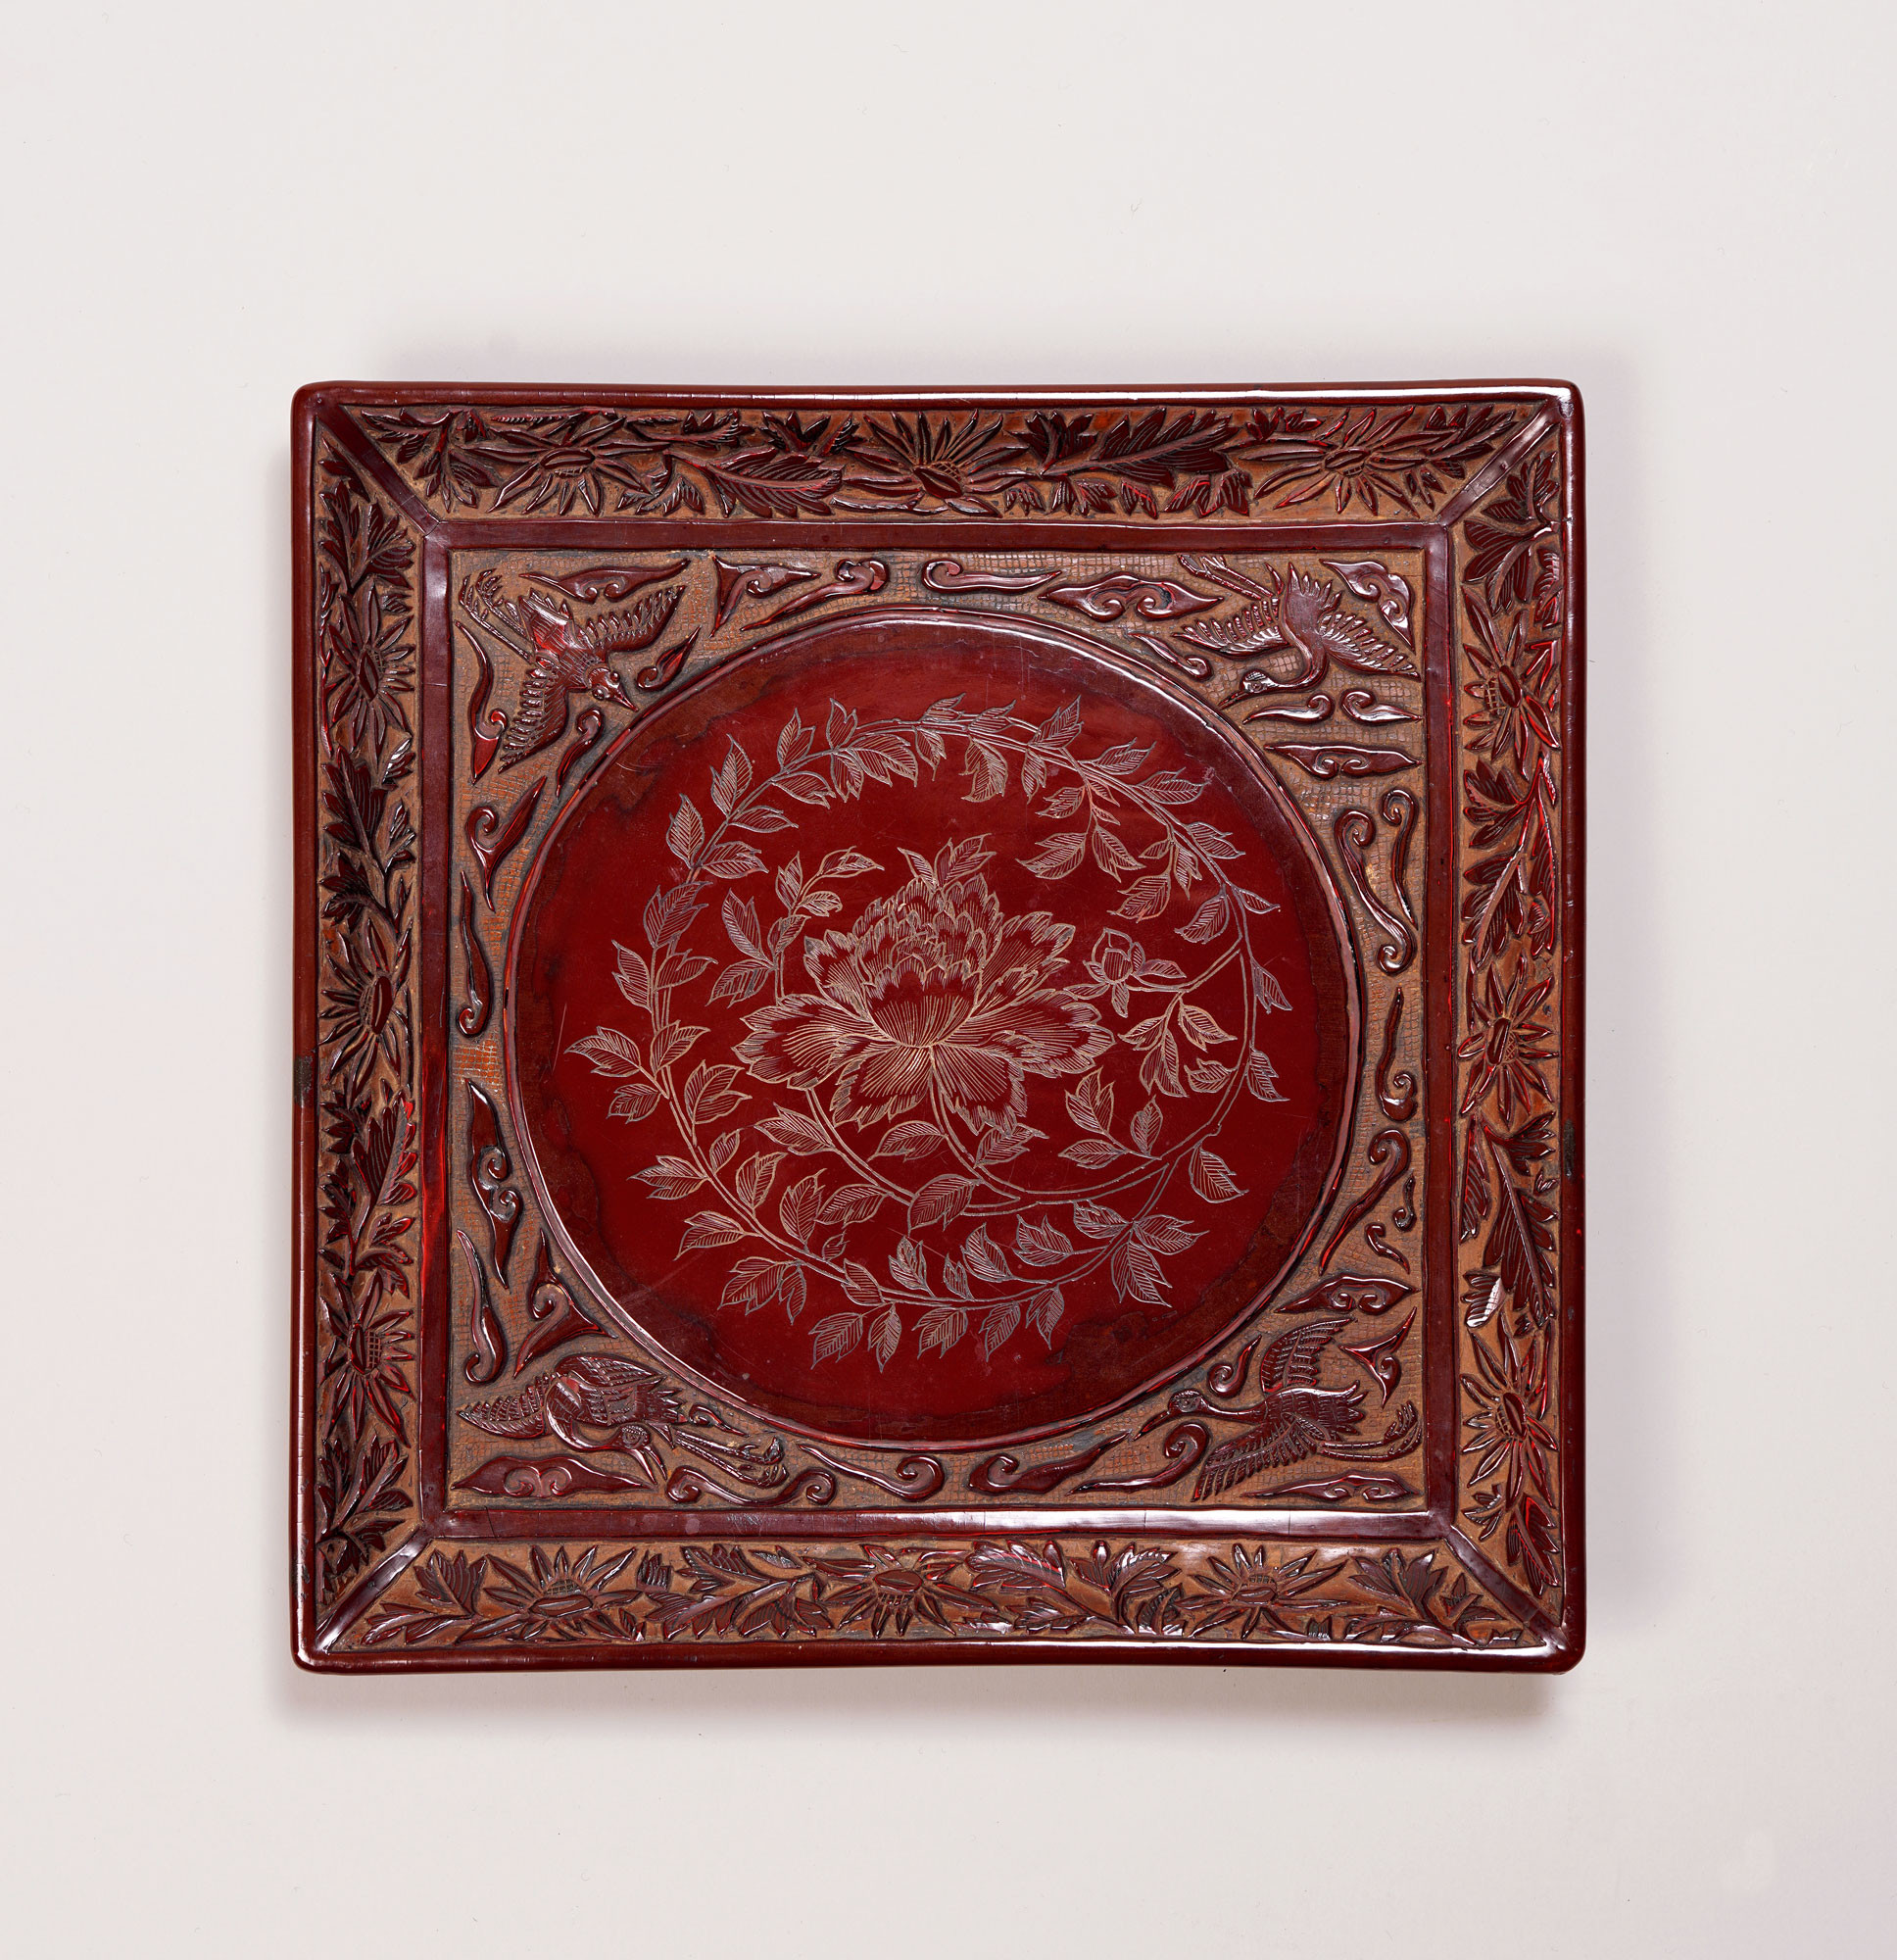 A LACQUERED‘VCLOUD, CRANE AND PEONY’PLATE IN SQUARE SHAPE